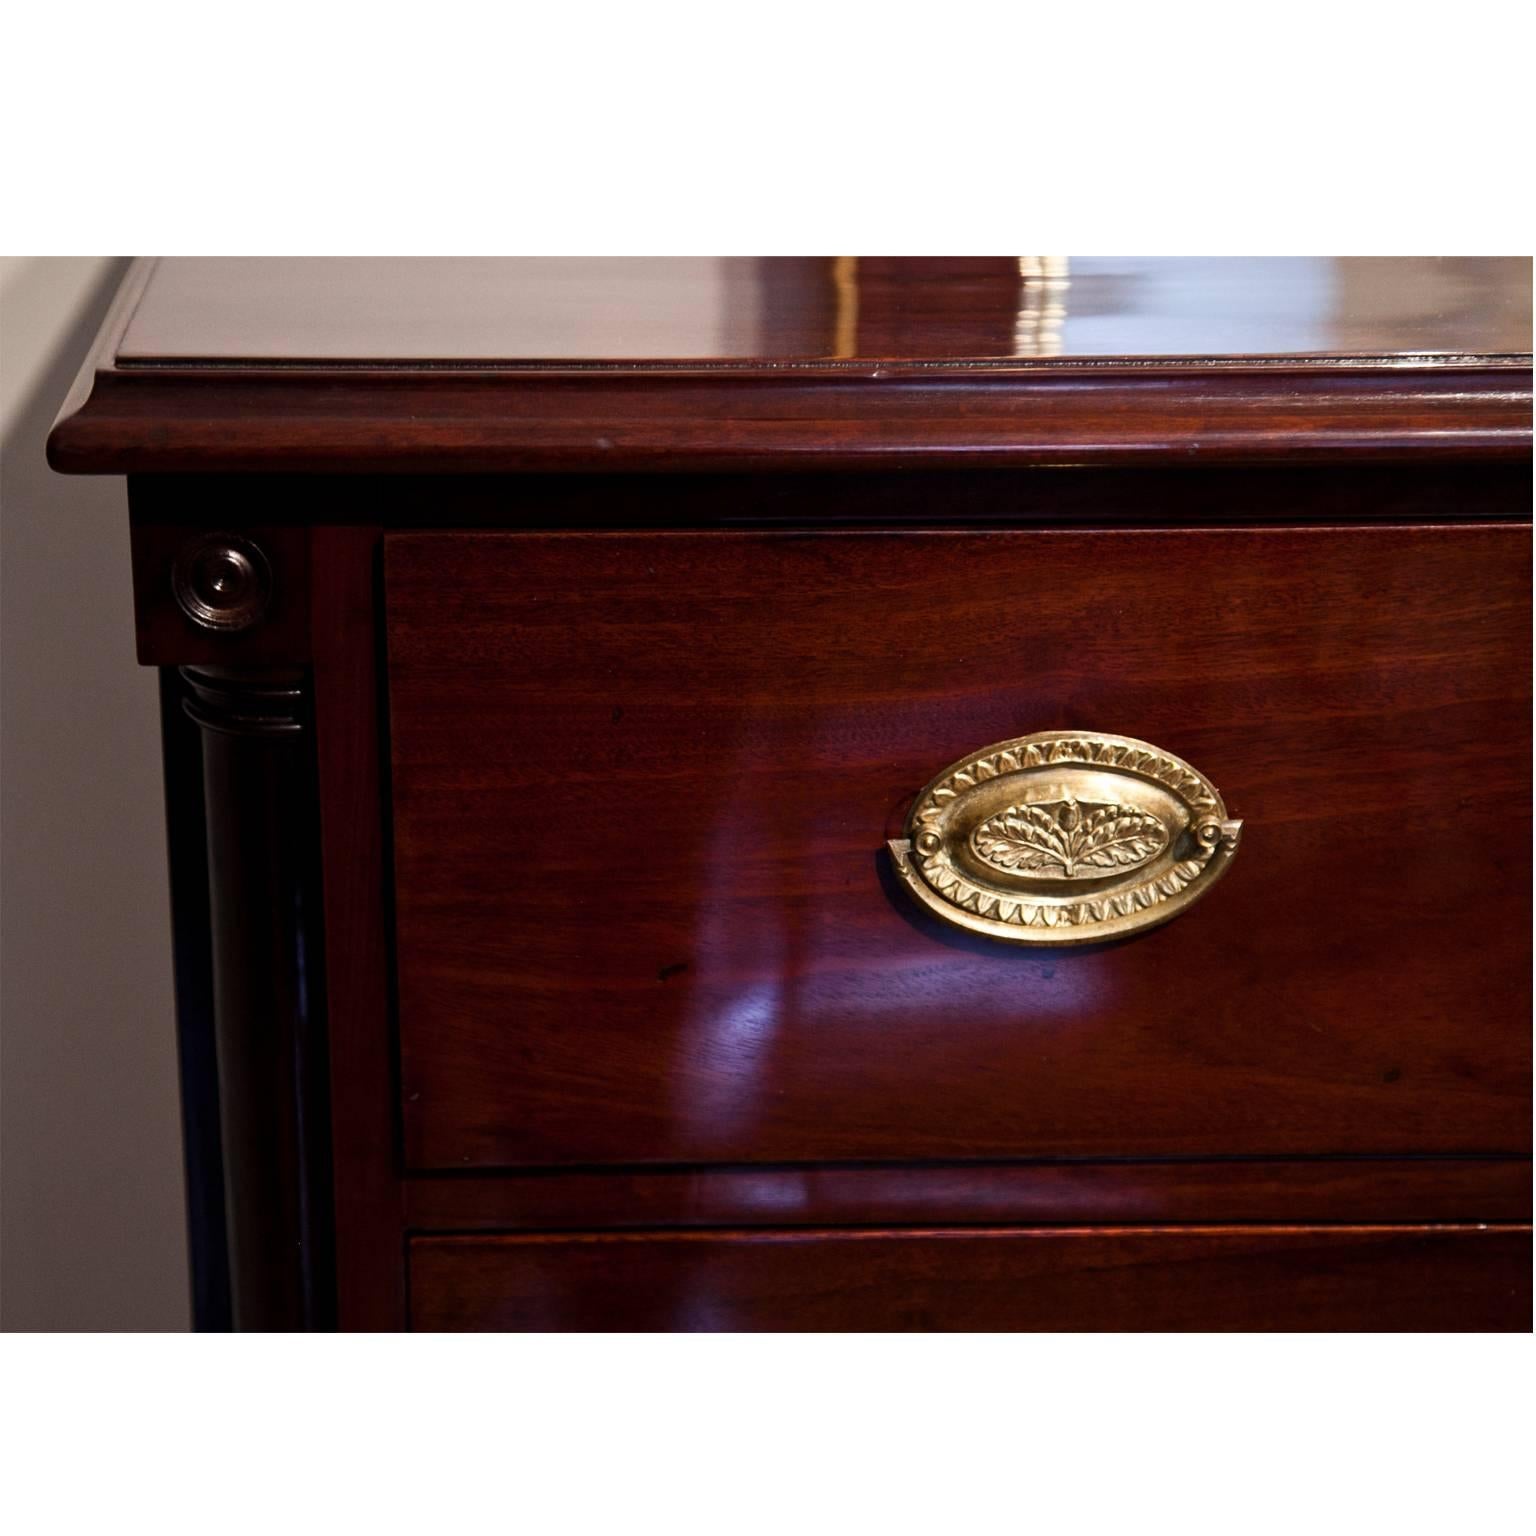 Mahogany chest of drawers on tapered feet with four drawers and brass fittings. The streamlined body with quarter columns at the corners.